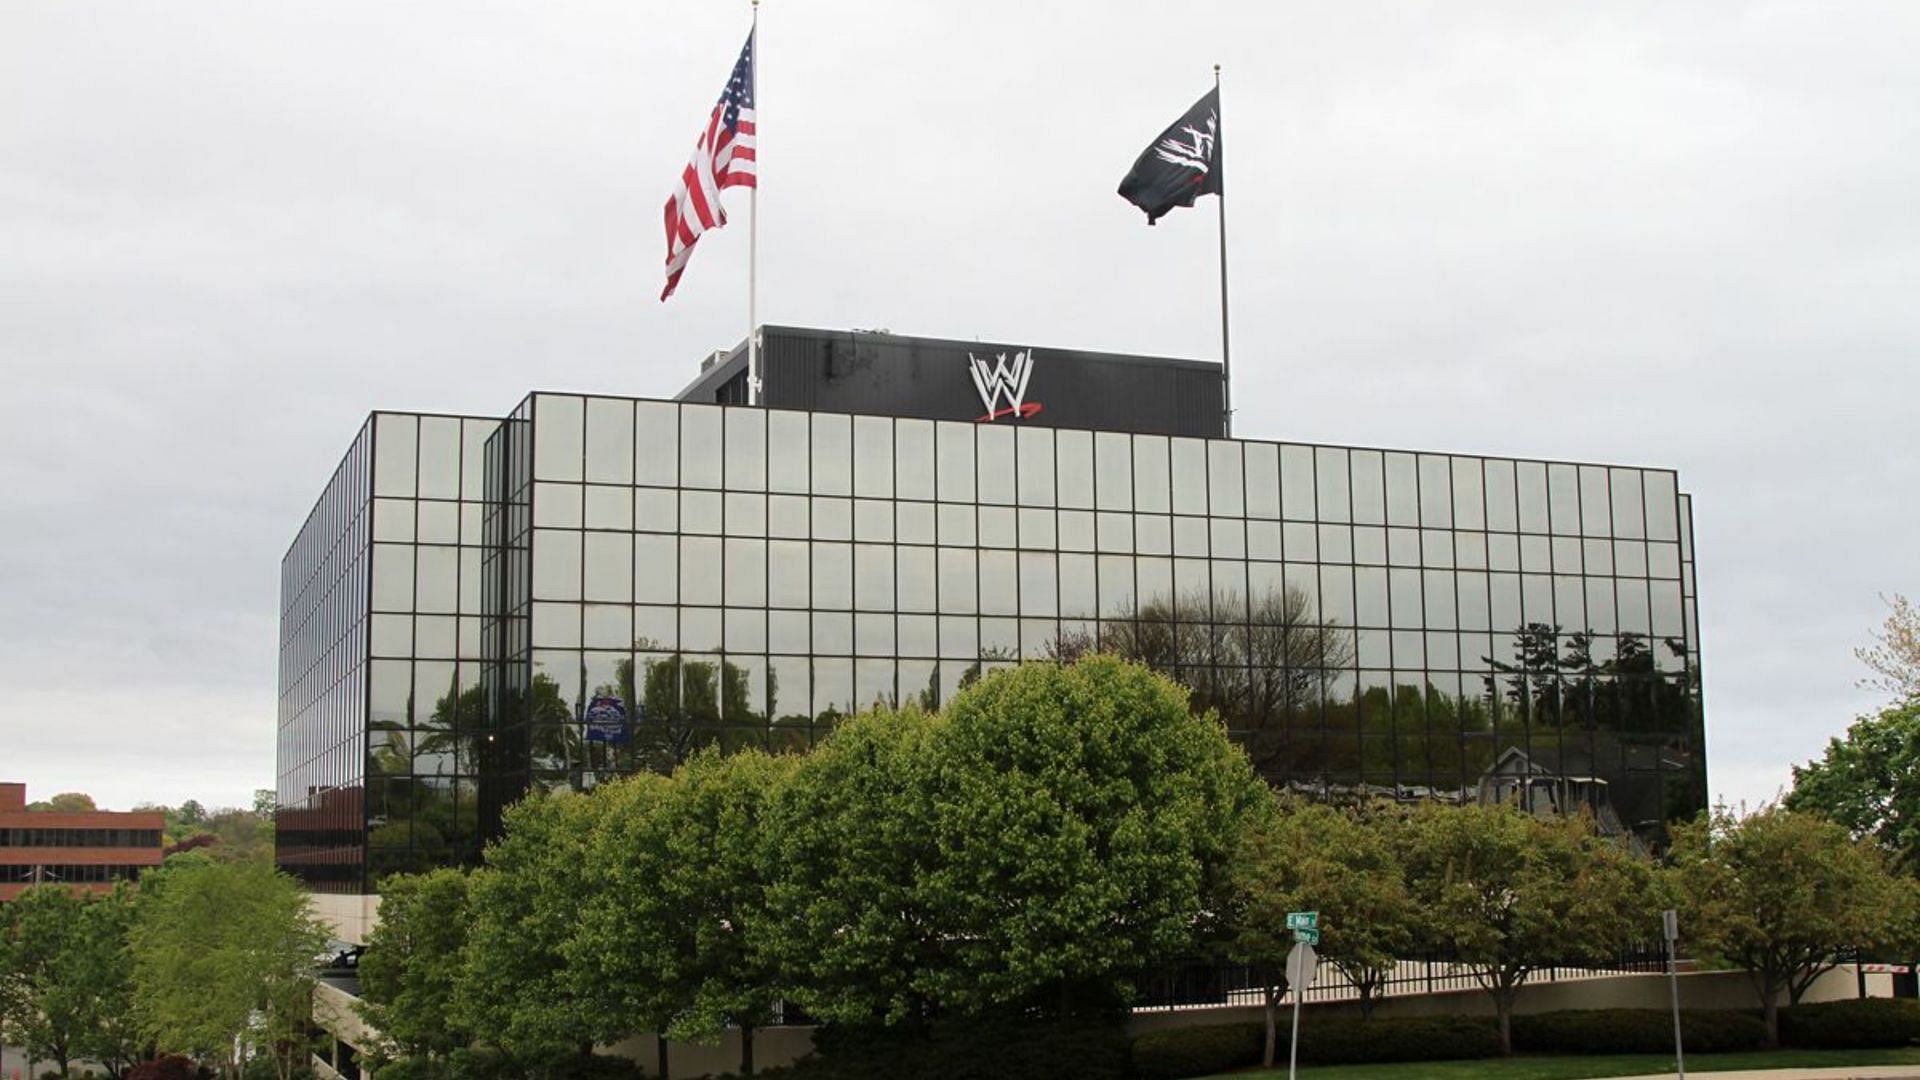 Vince McMahon recently returned to WWE as Executive Chairman